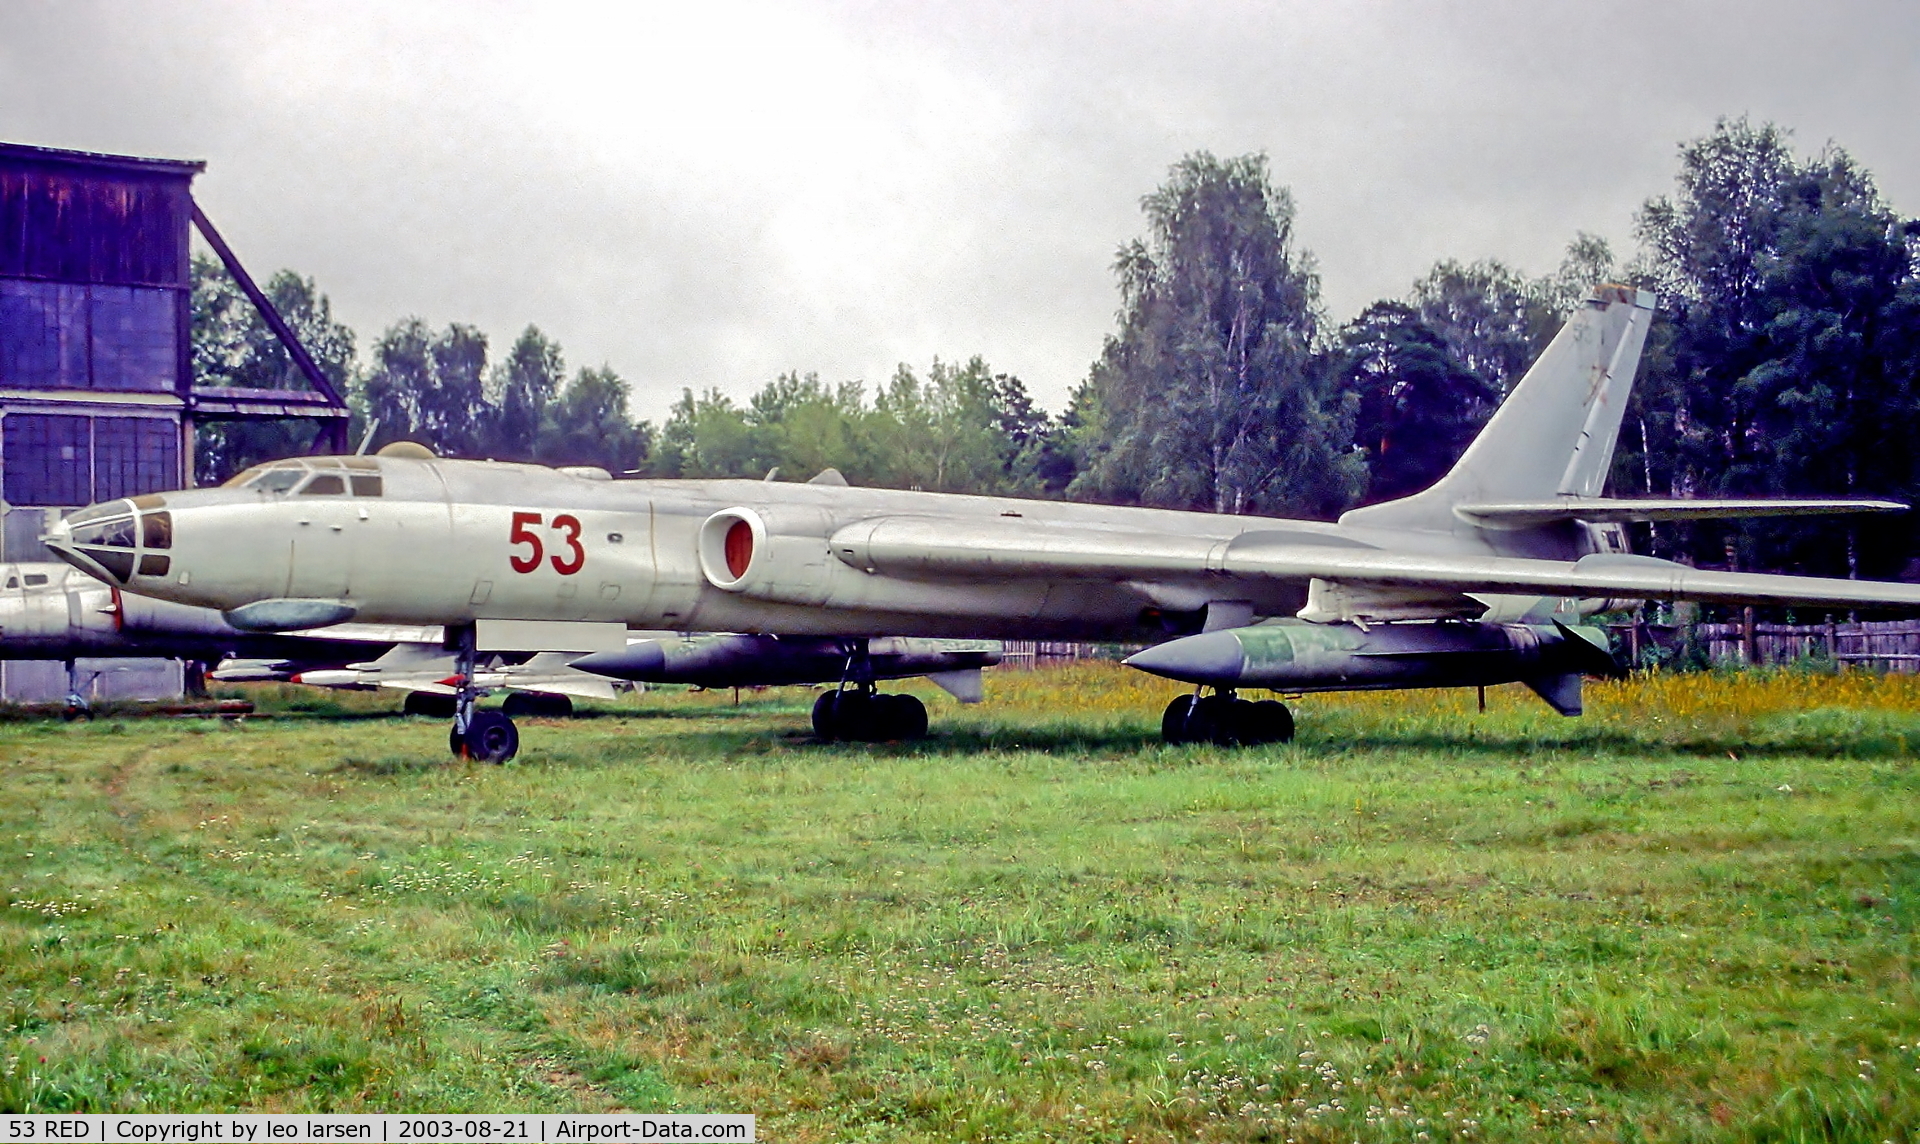 53 RED, 1962 Tupolev Tu-16K-10-26 C/N 4201004, Monino Moscow 21.8.03
with 2 KSR-5S under wings.